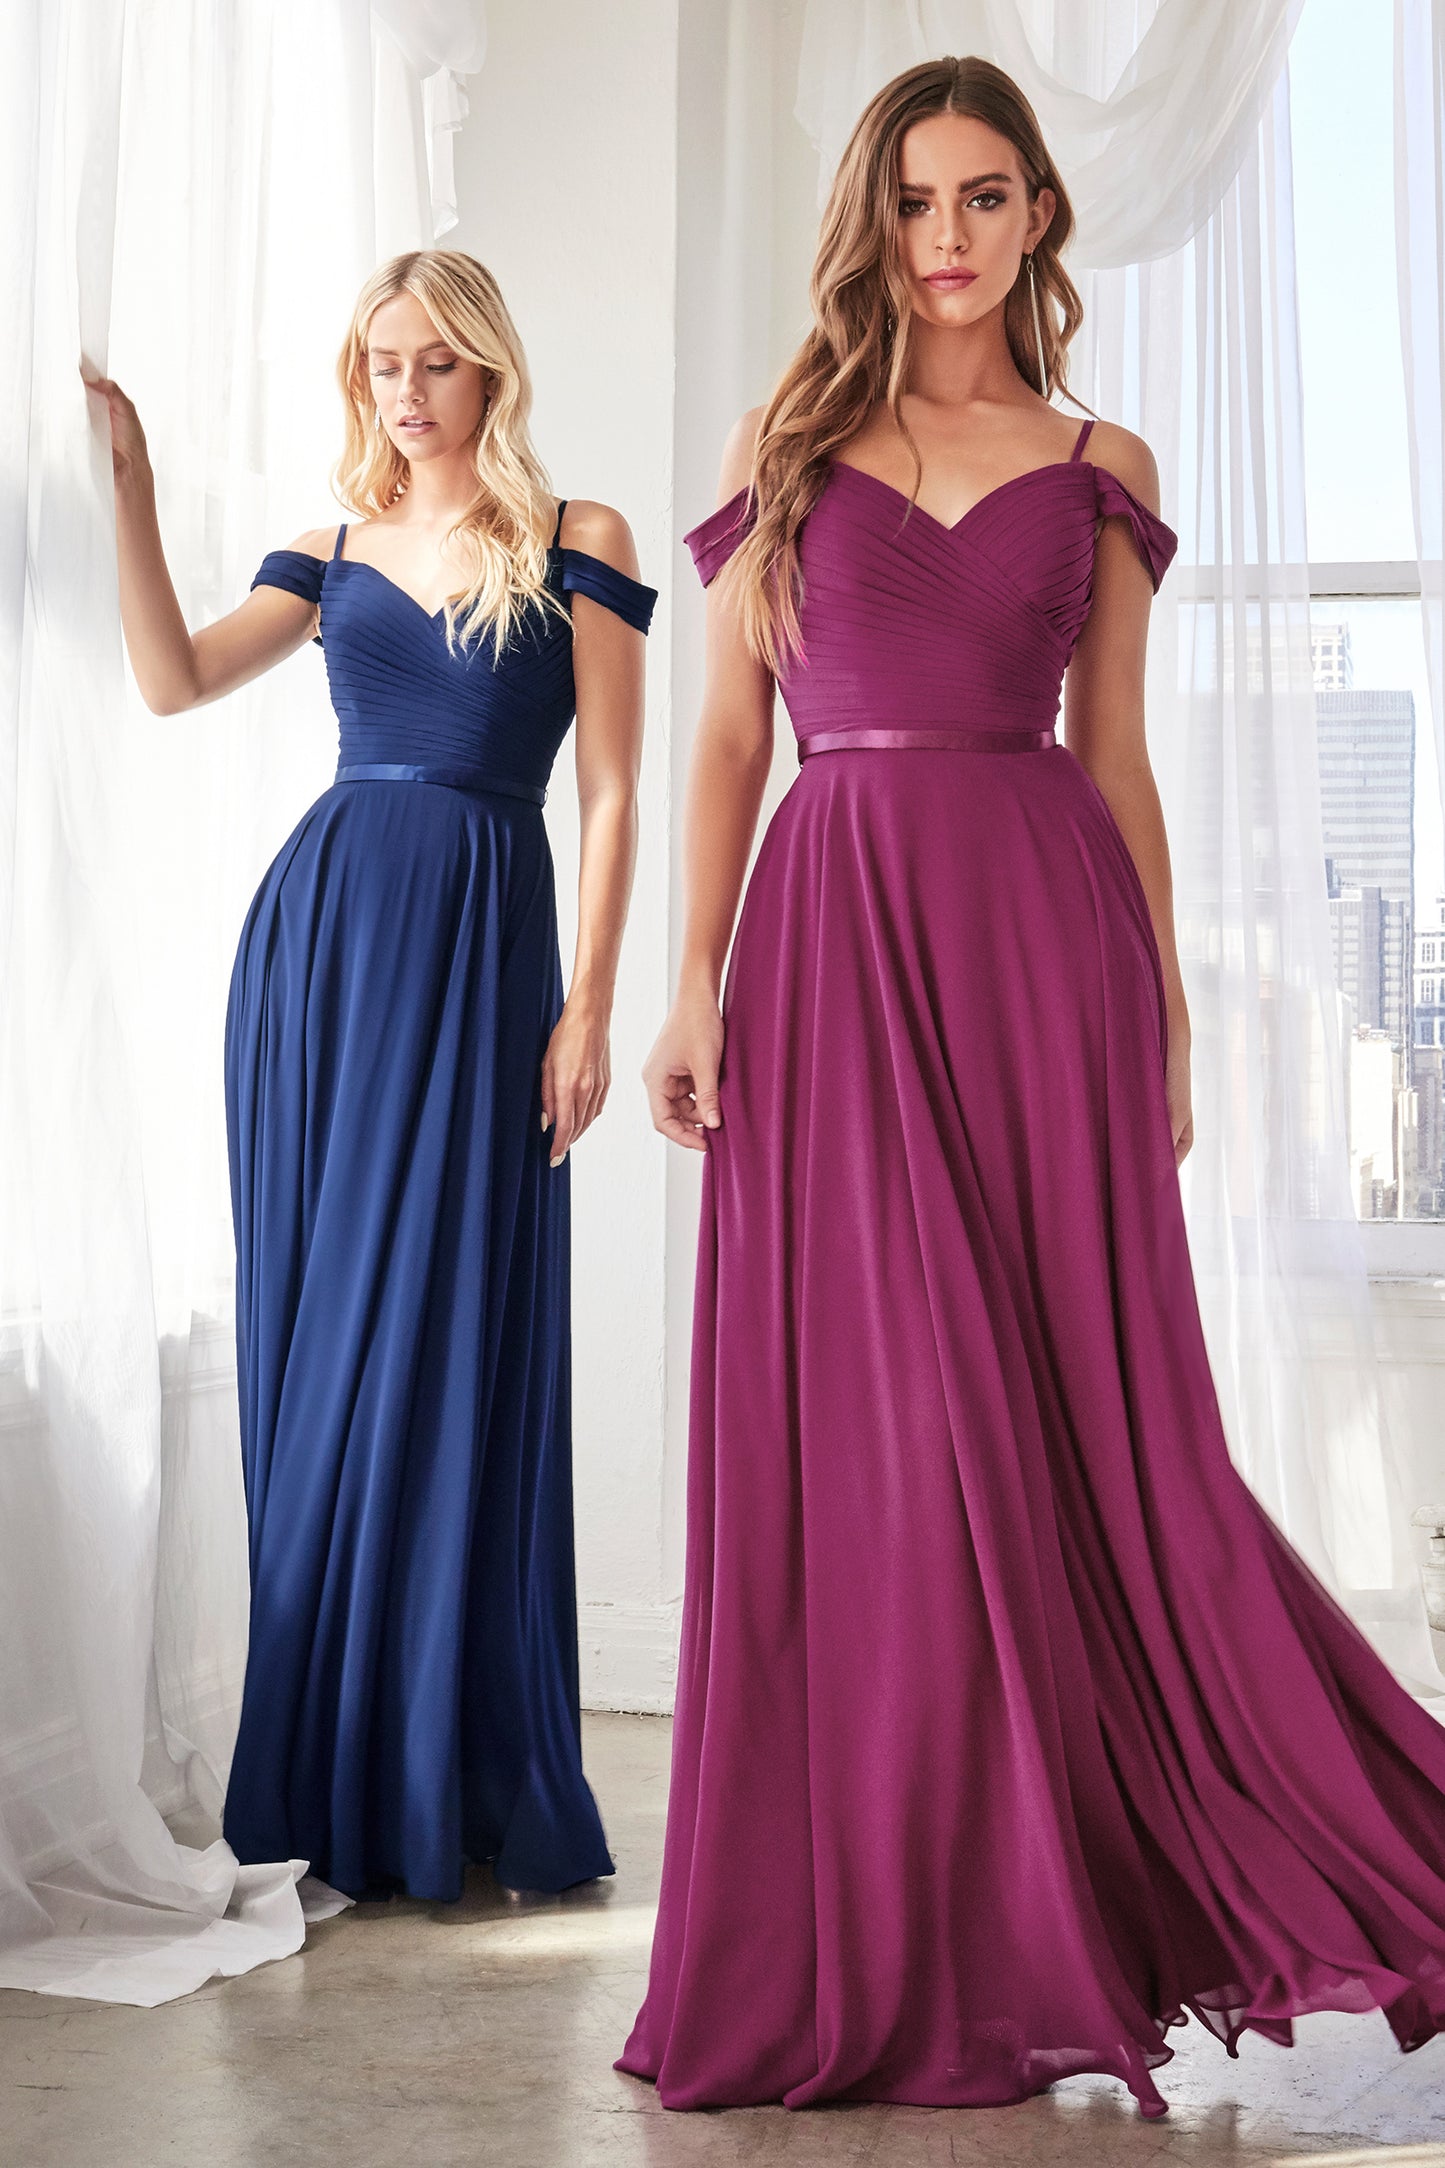 Off the Shoulder A-Line Chiffon Dress by Cinderella Divine CD0156 - Special Occasion/Curves